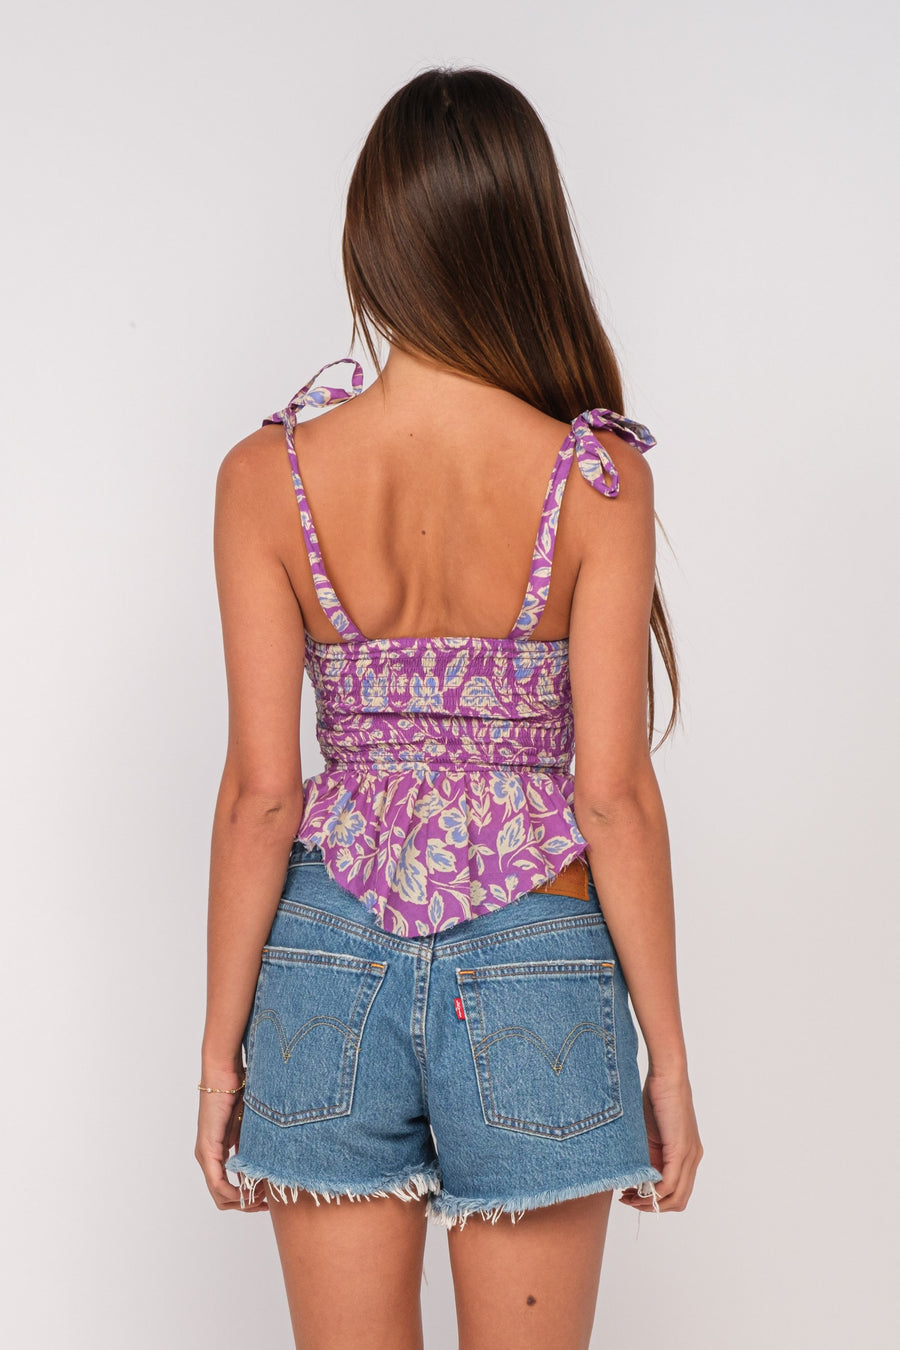 Floral top with tied straps and ruffle bottom.